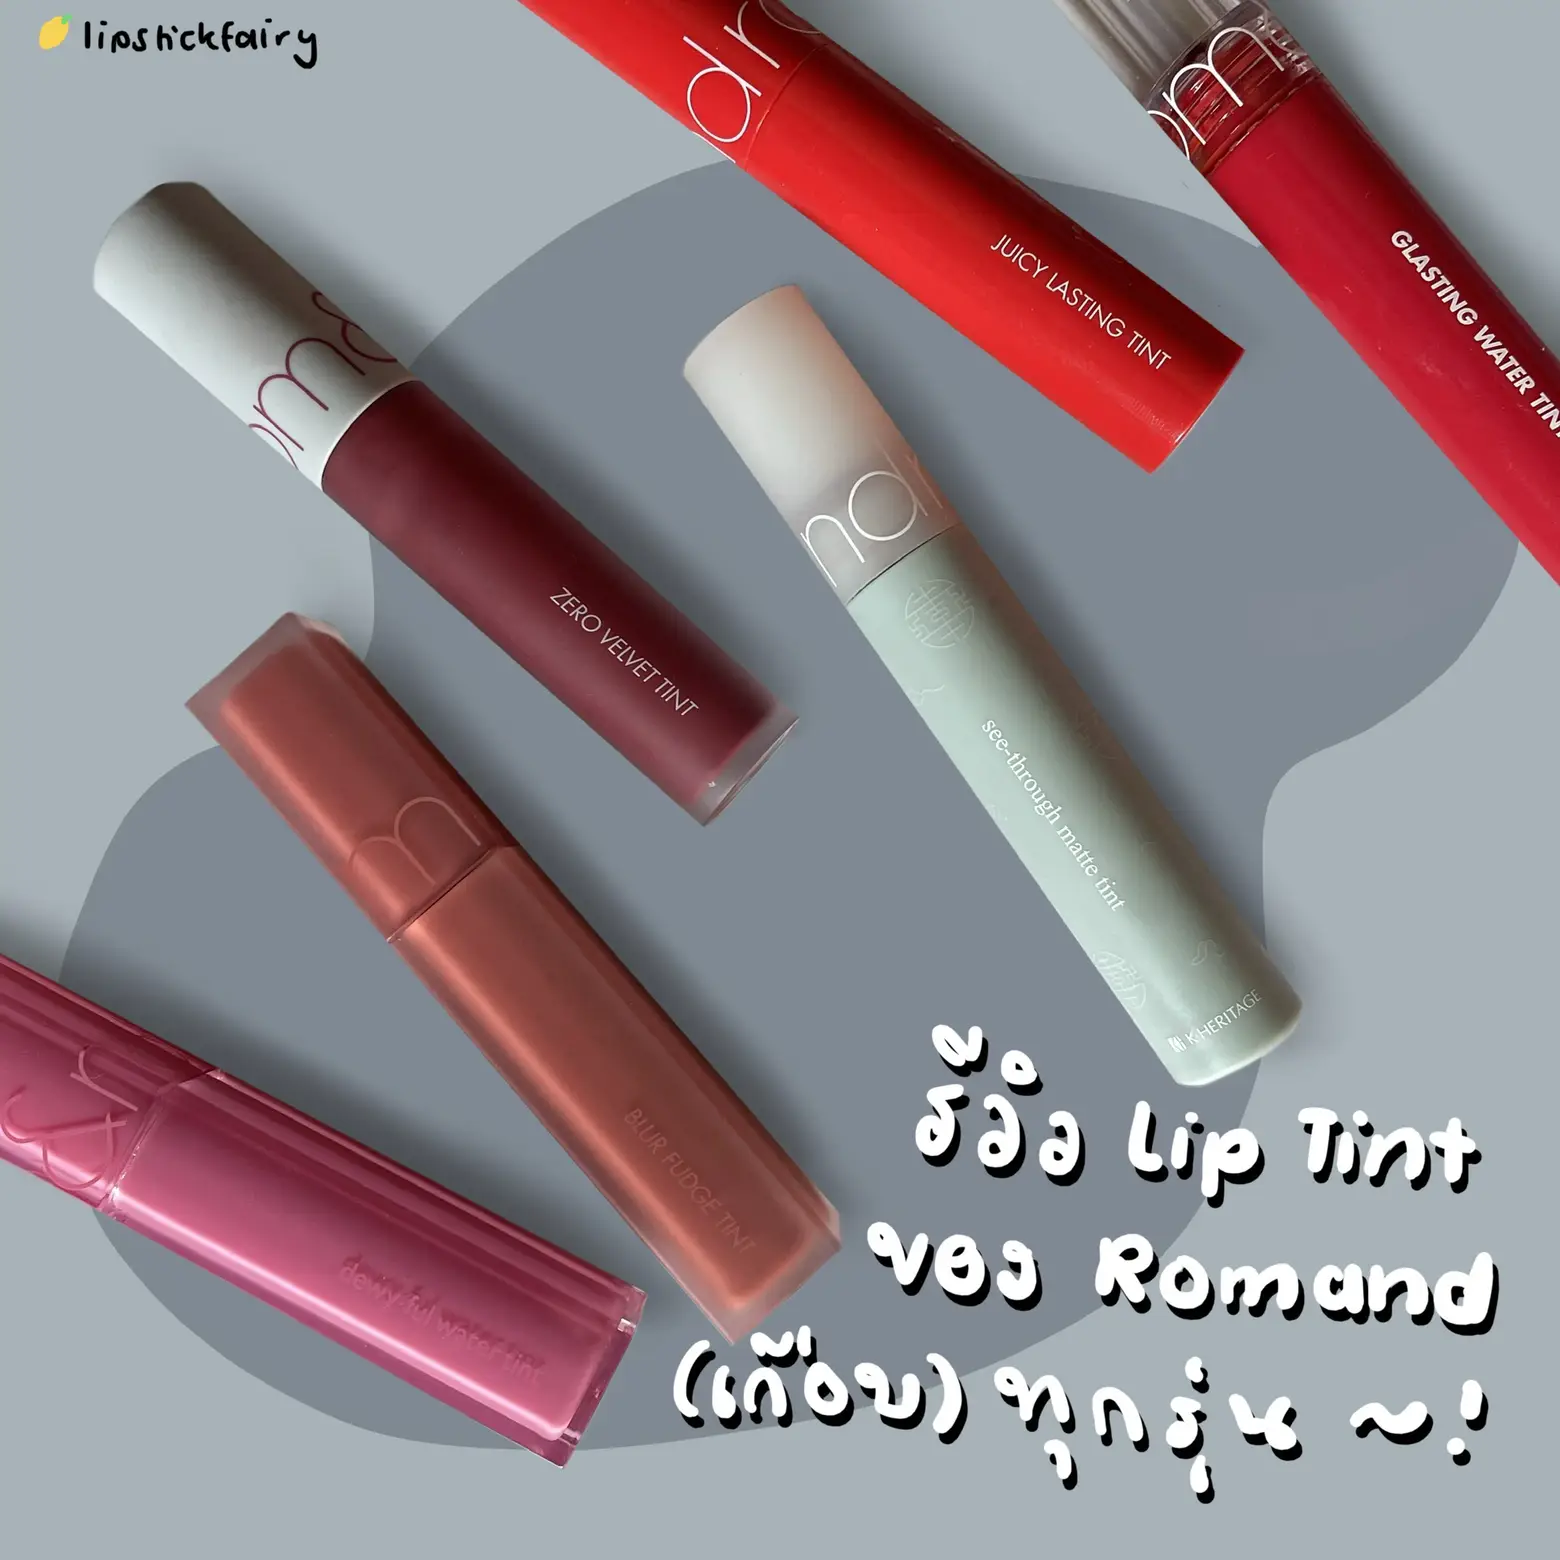 rom & nd lip review with almost every model, Gallery posted by Thassawannn